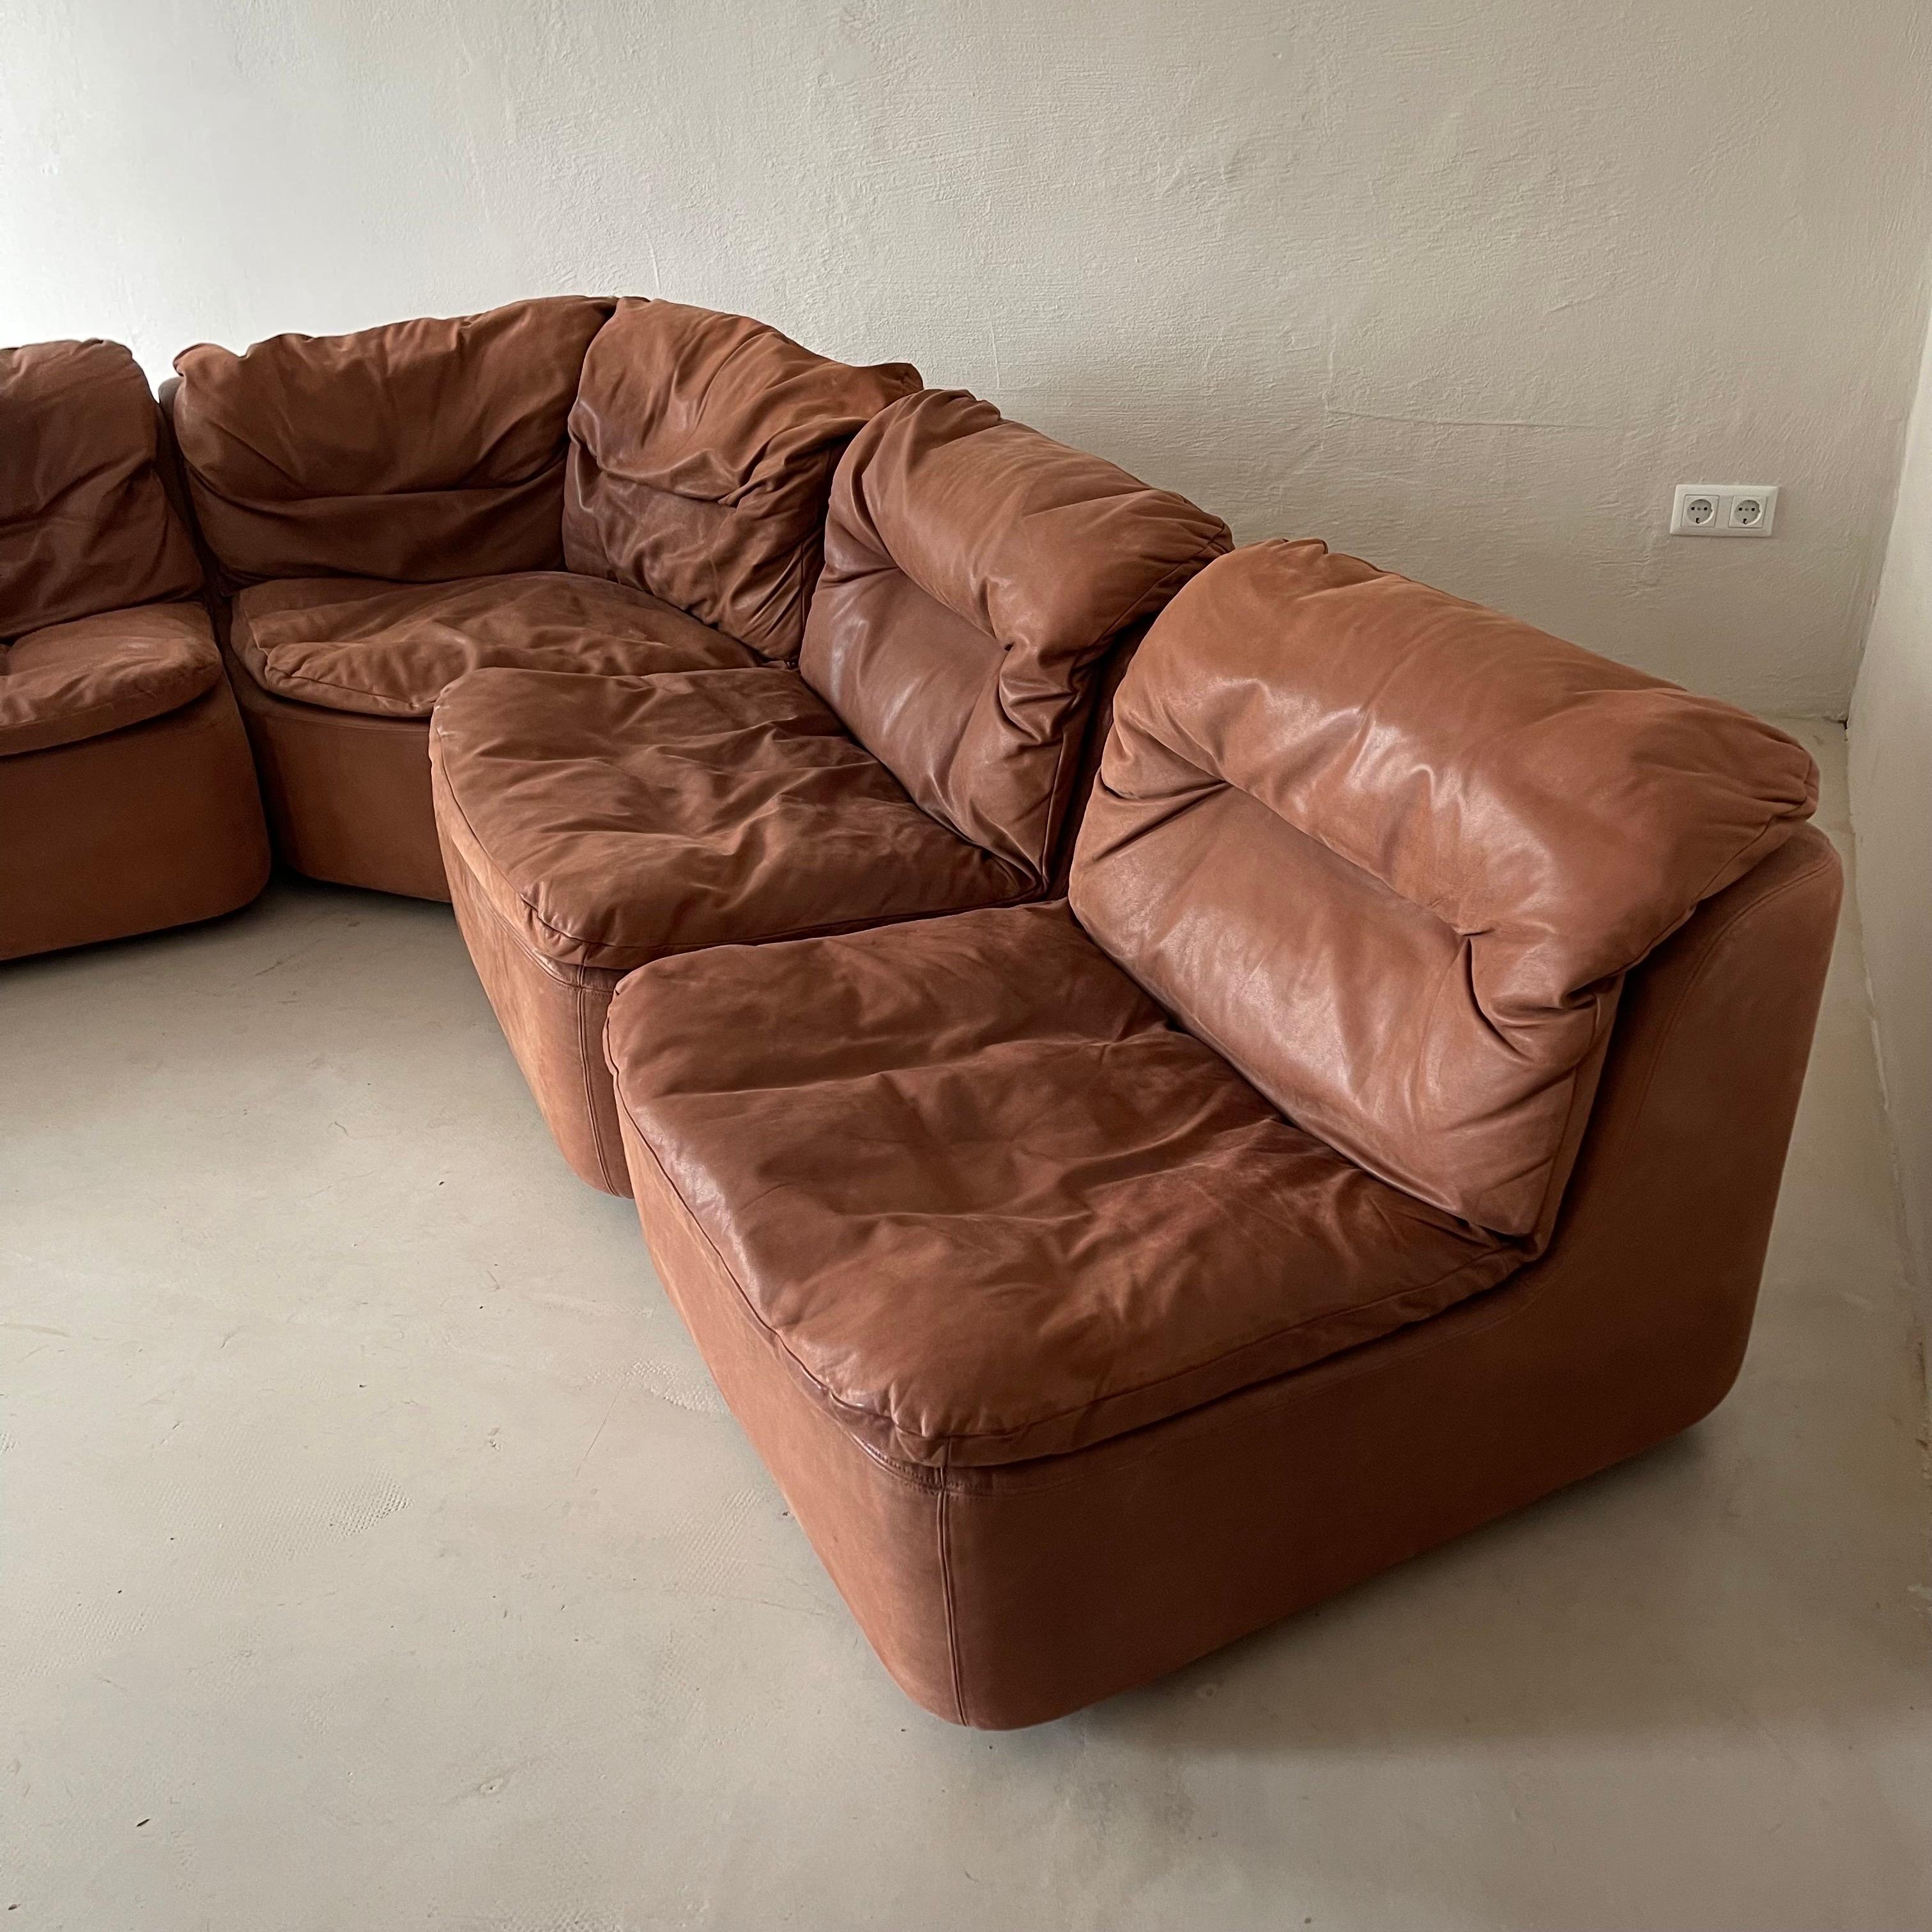 Late 20th Century Vintage Modular Sofa by Friedrich Hill for Walter Knoll 1970s For Sale